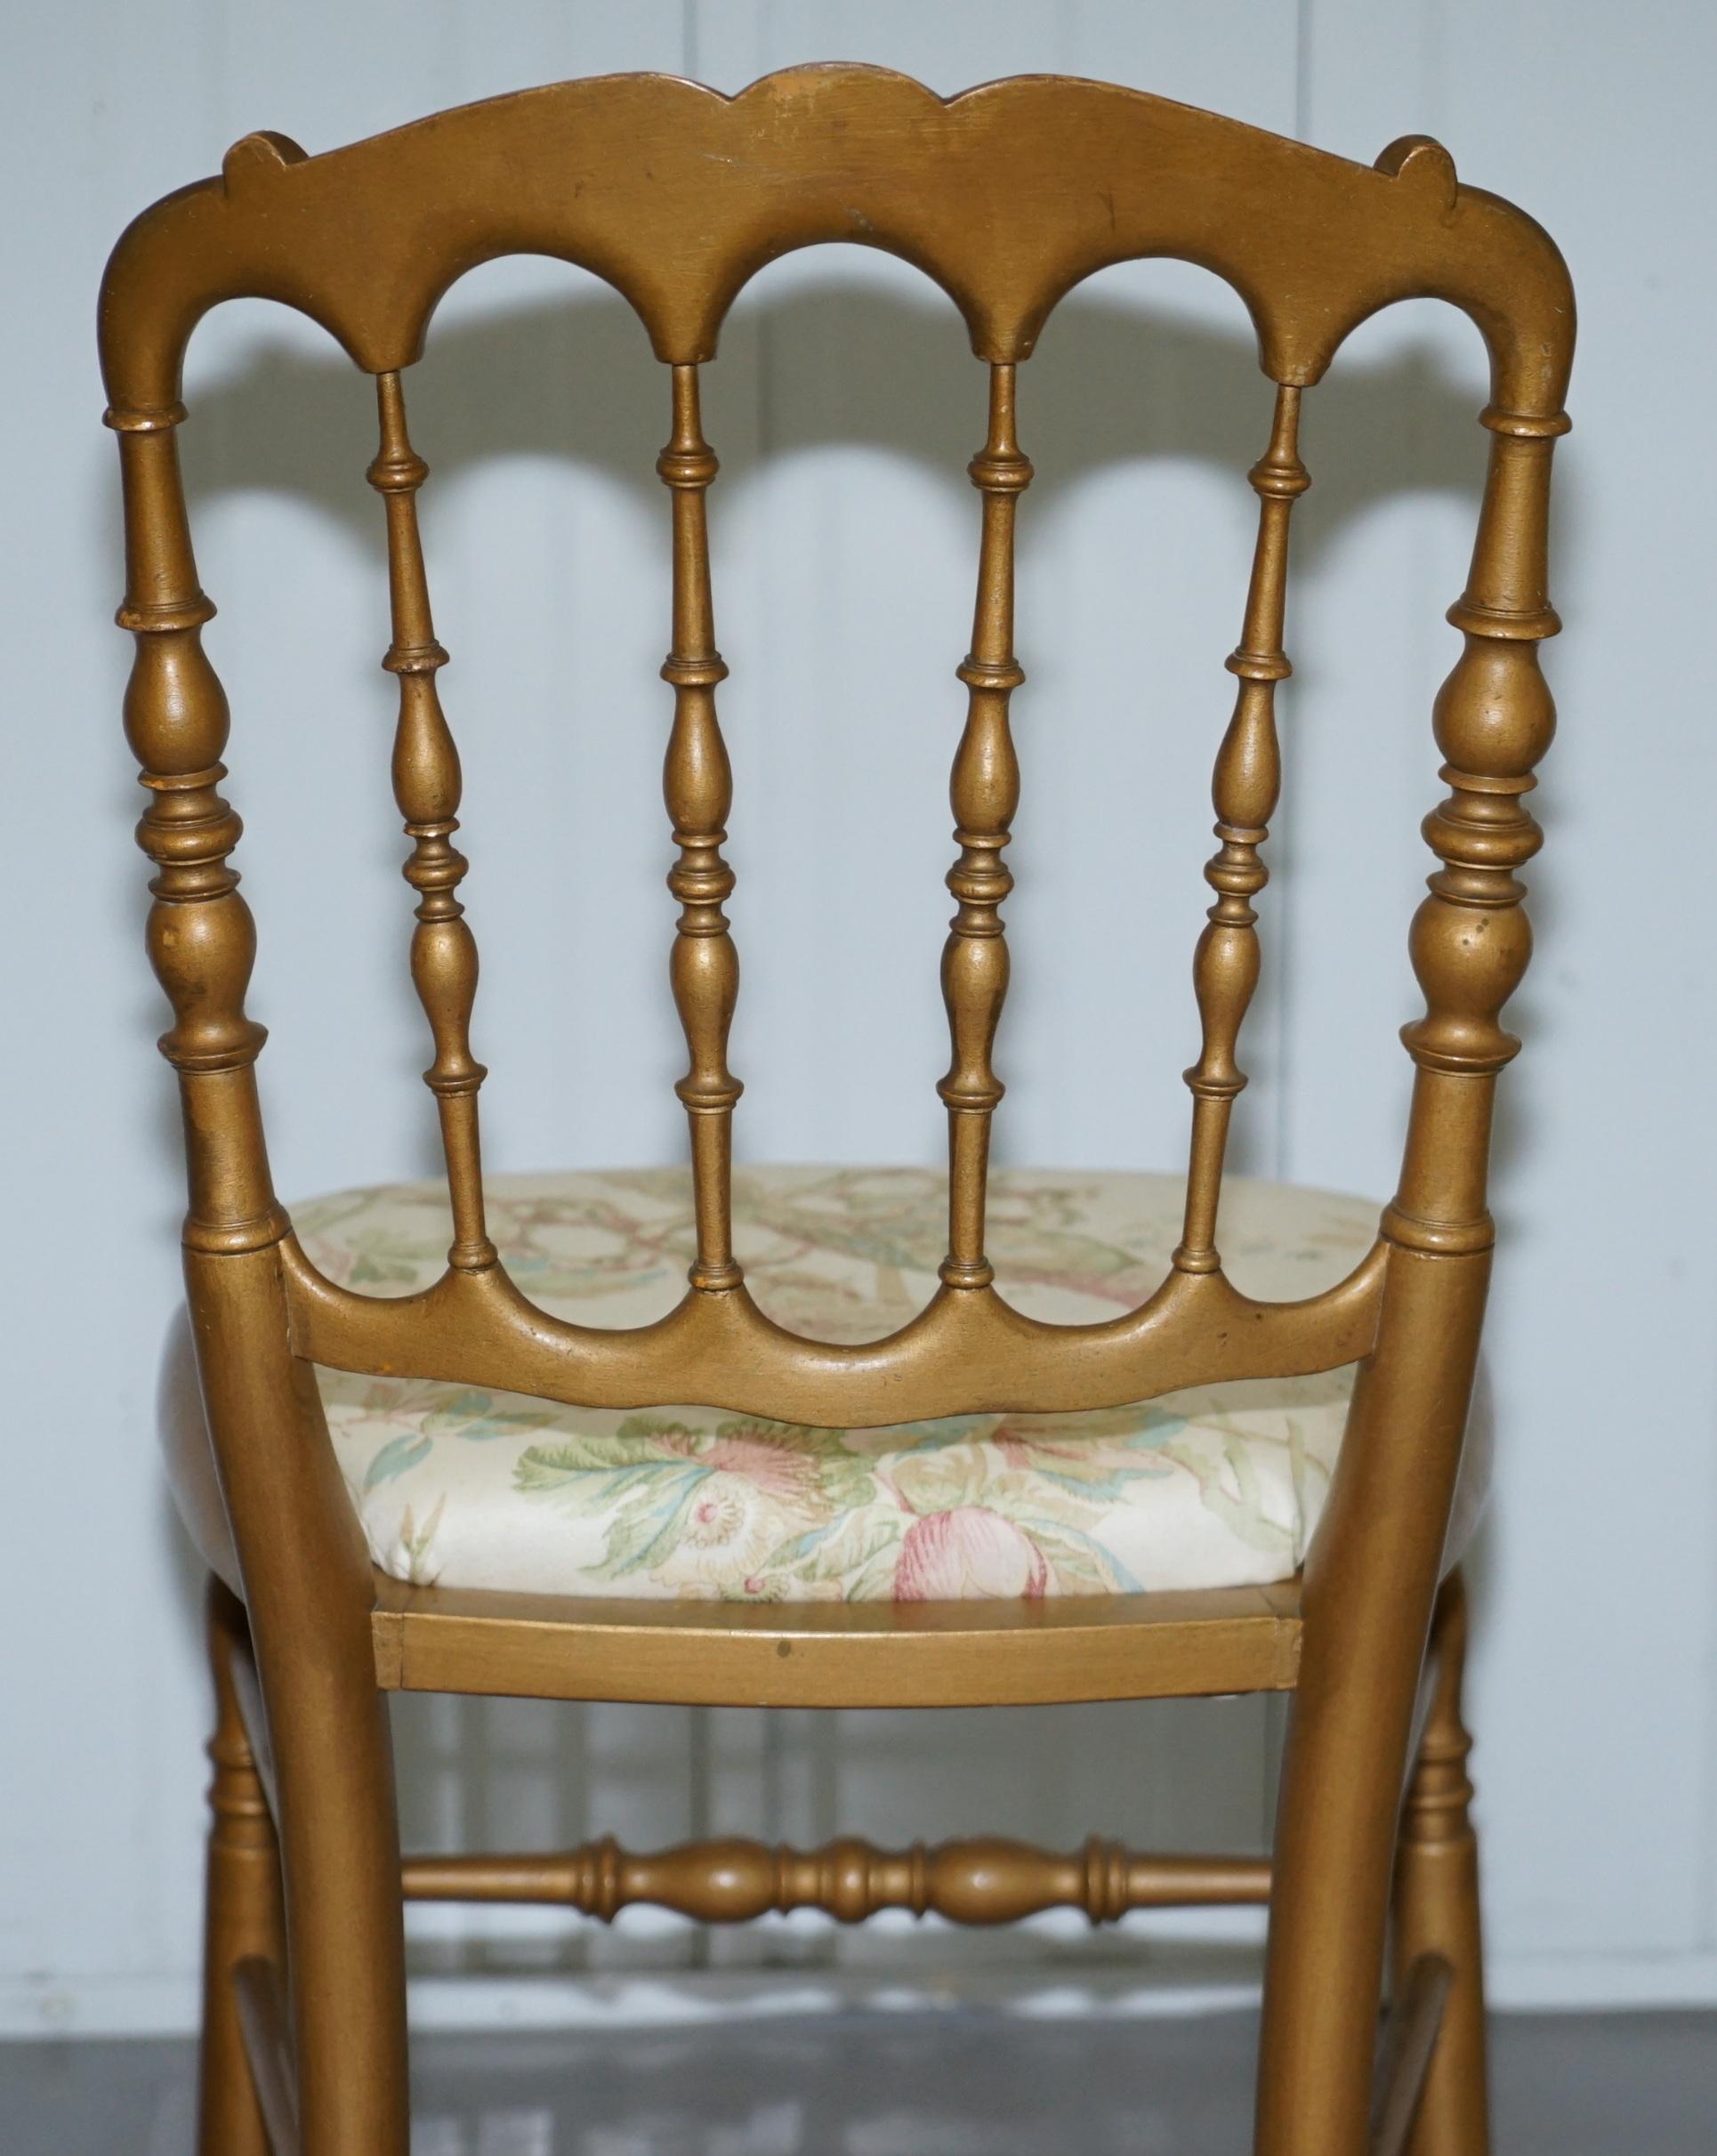 Regency Style Gold Giltwood Spindle Chair circa 1900 Ornate Bird Upholstery For Sale 7